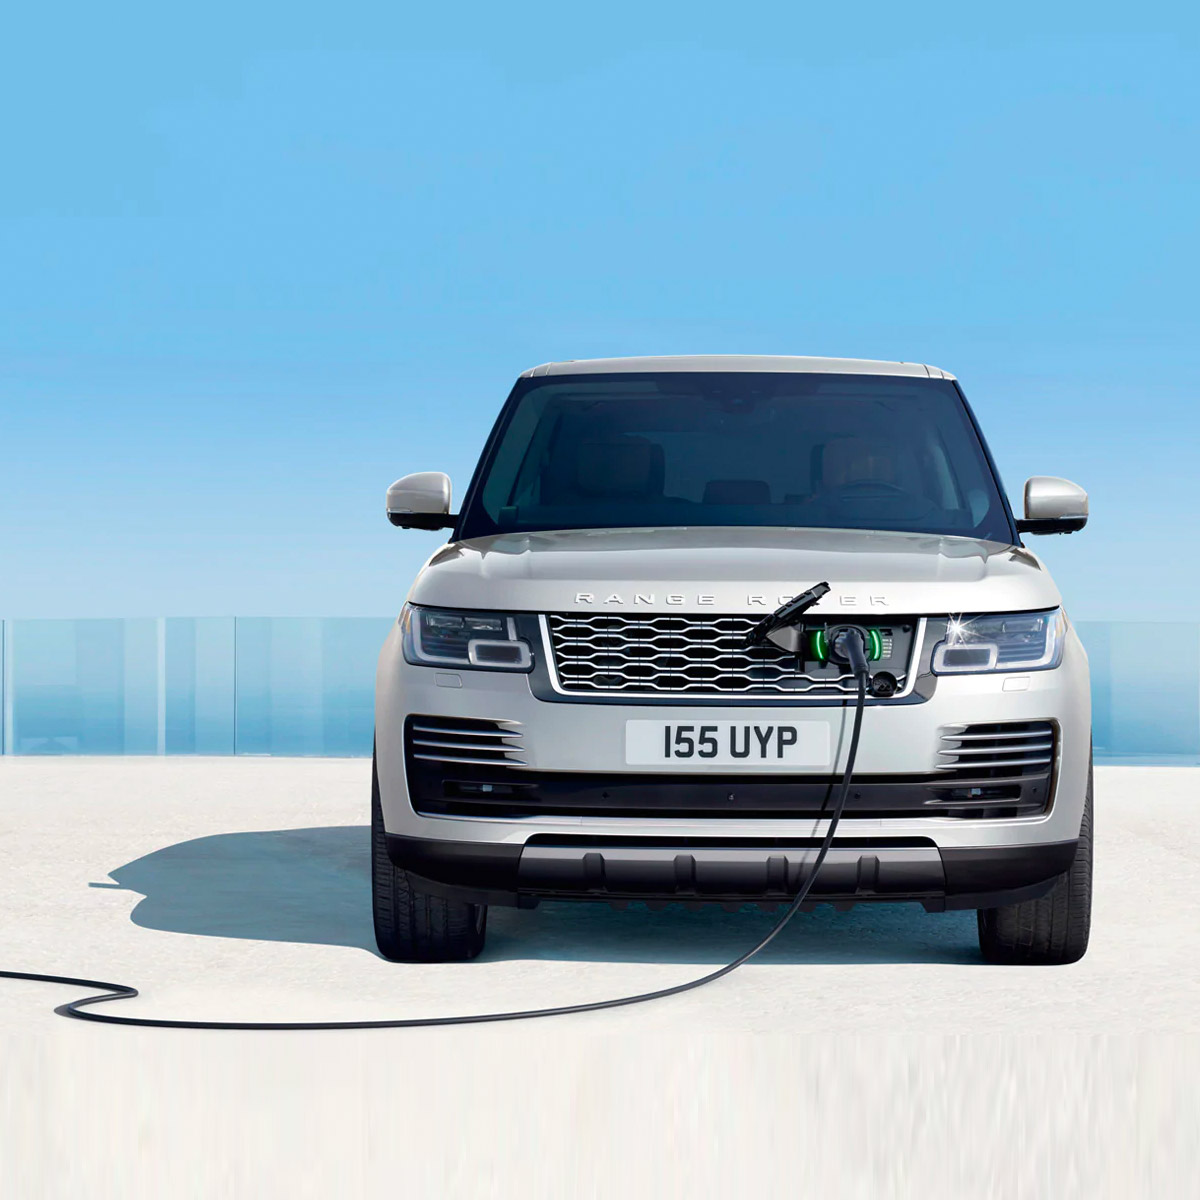 frontal profile of land rover range rover hybrid suv getting charged from the frontal grill